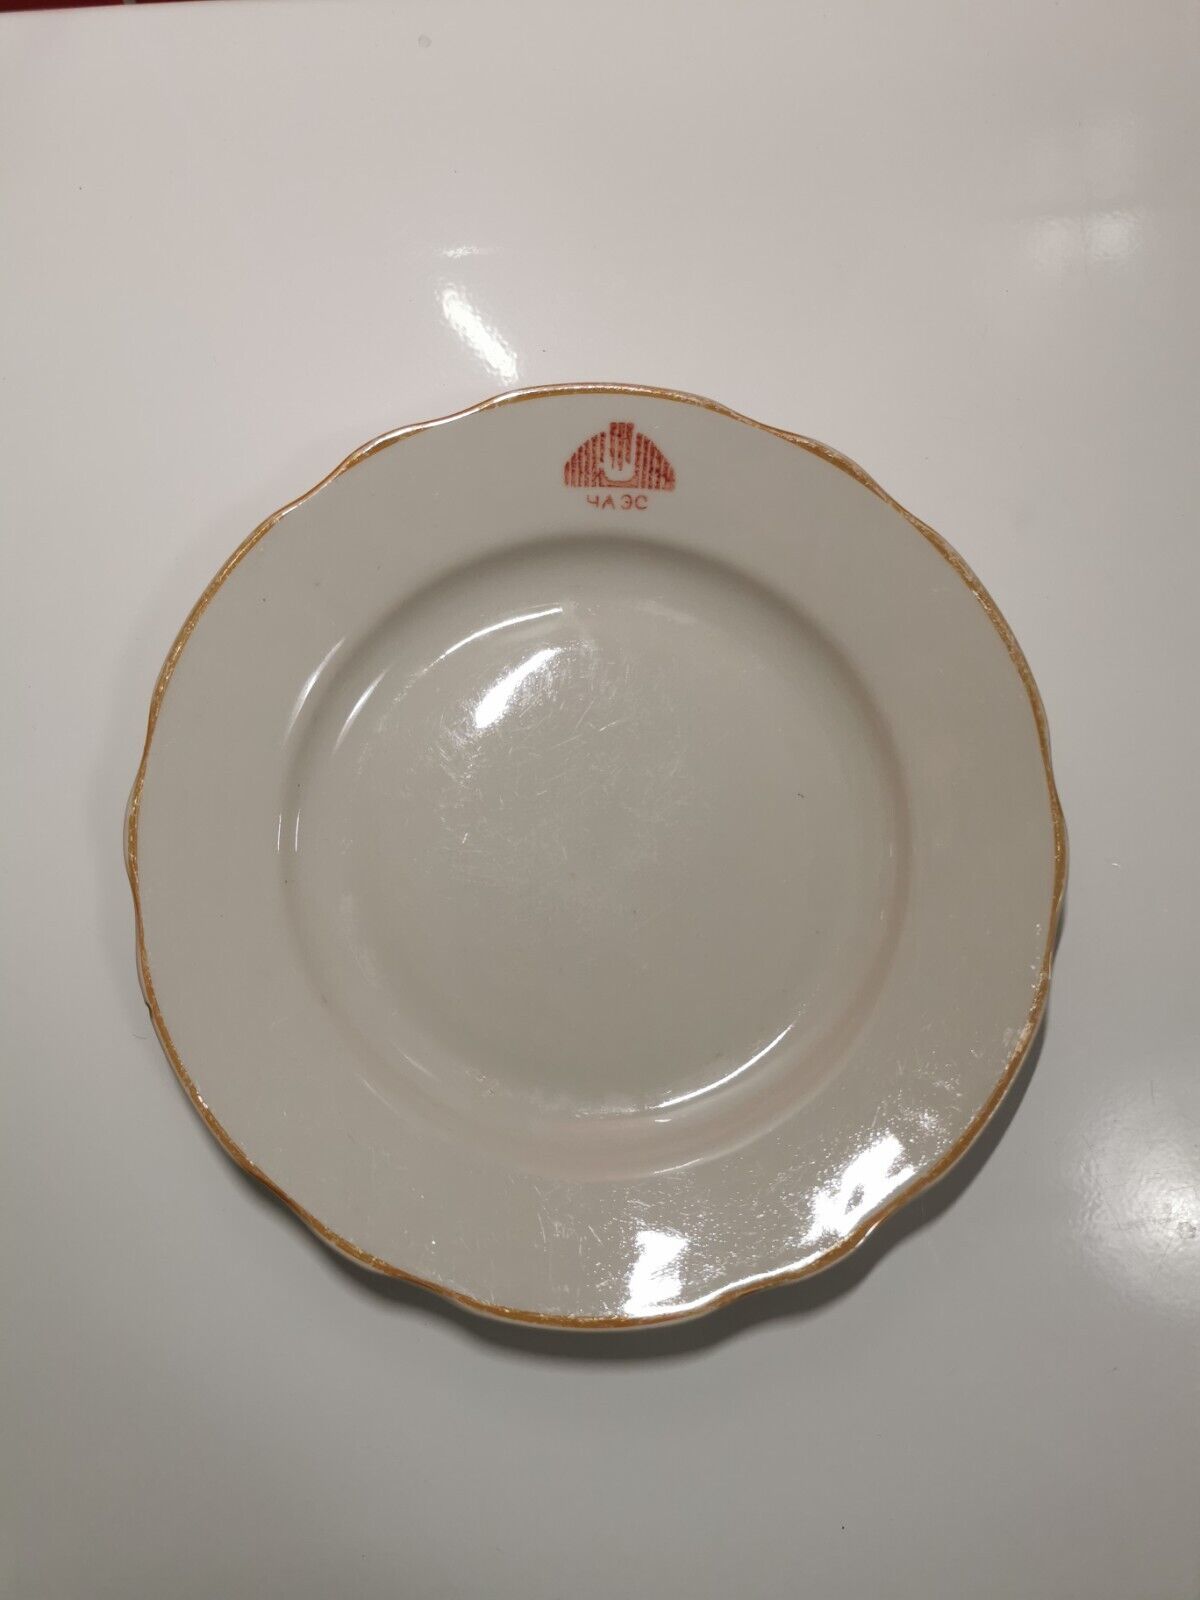 Original plate from Chernobyl workers cafeteria of Atomic Station 195mm